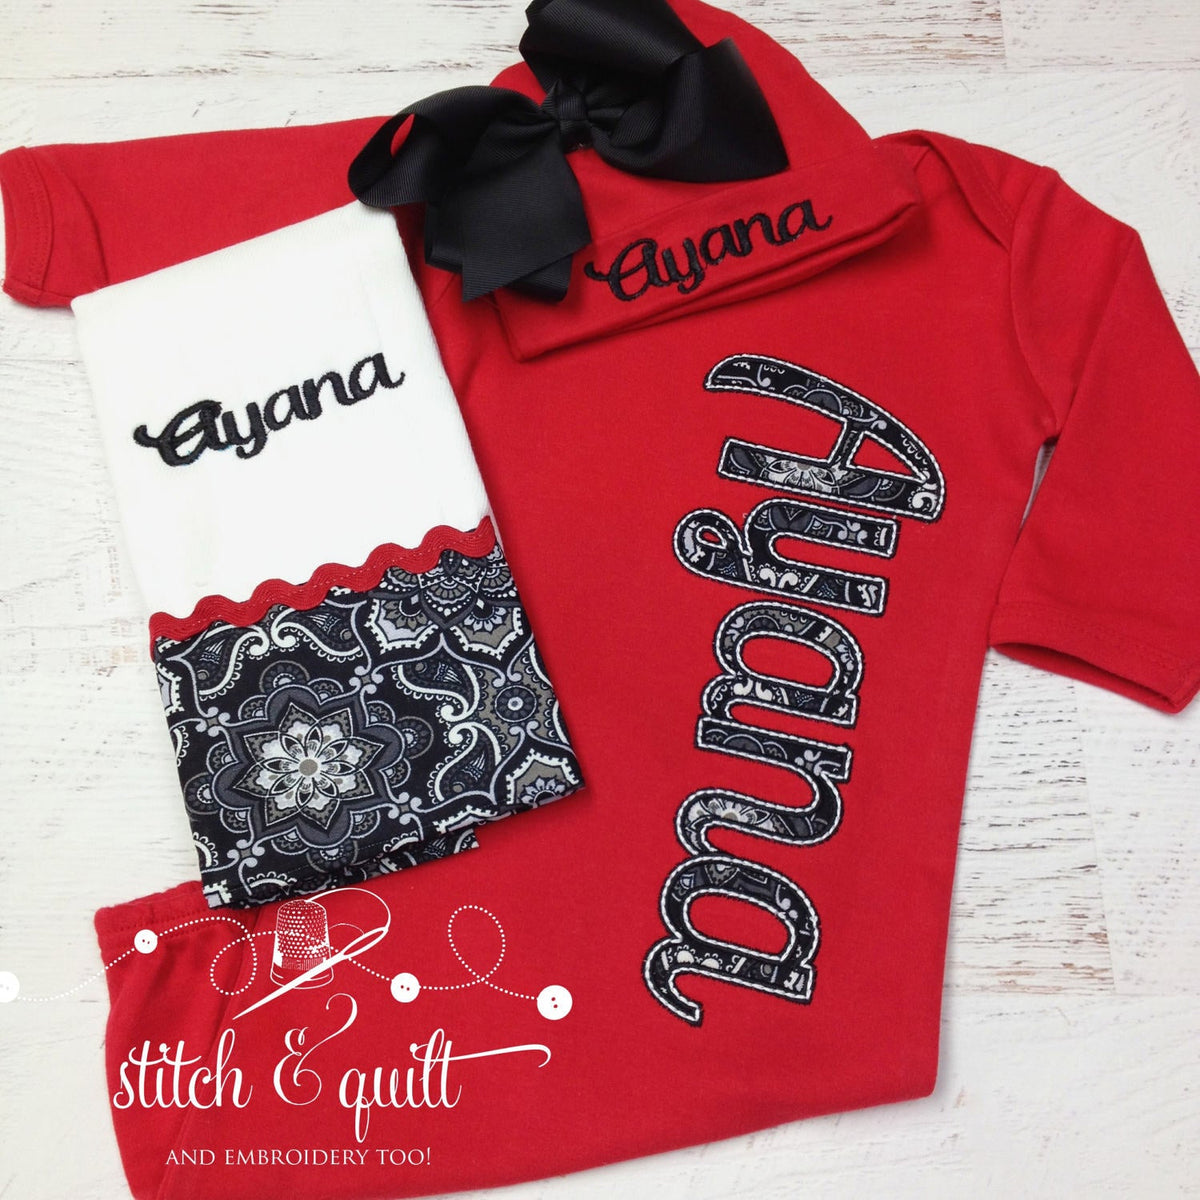 Newborn infant coming home outfit, Newborn gowns girl,  Red and Black Baby